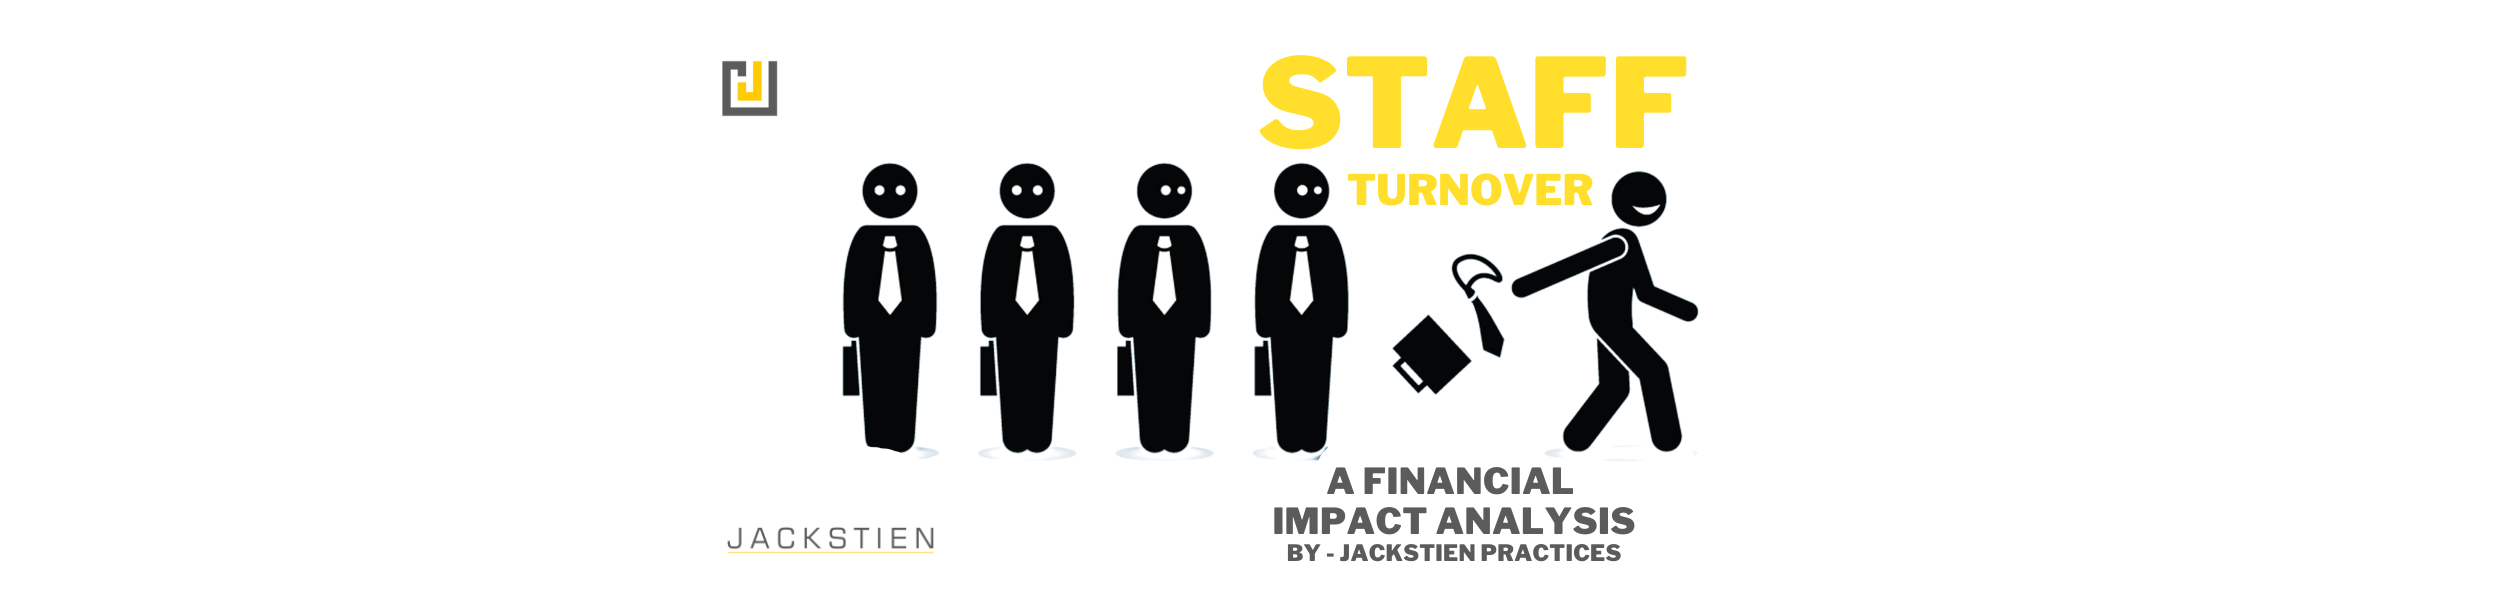 financial-impact-of-staff-turnover-jackstein-practices-flexibility